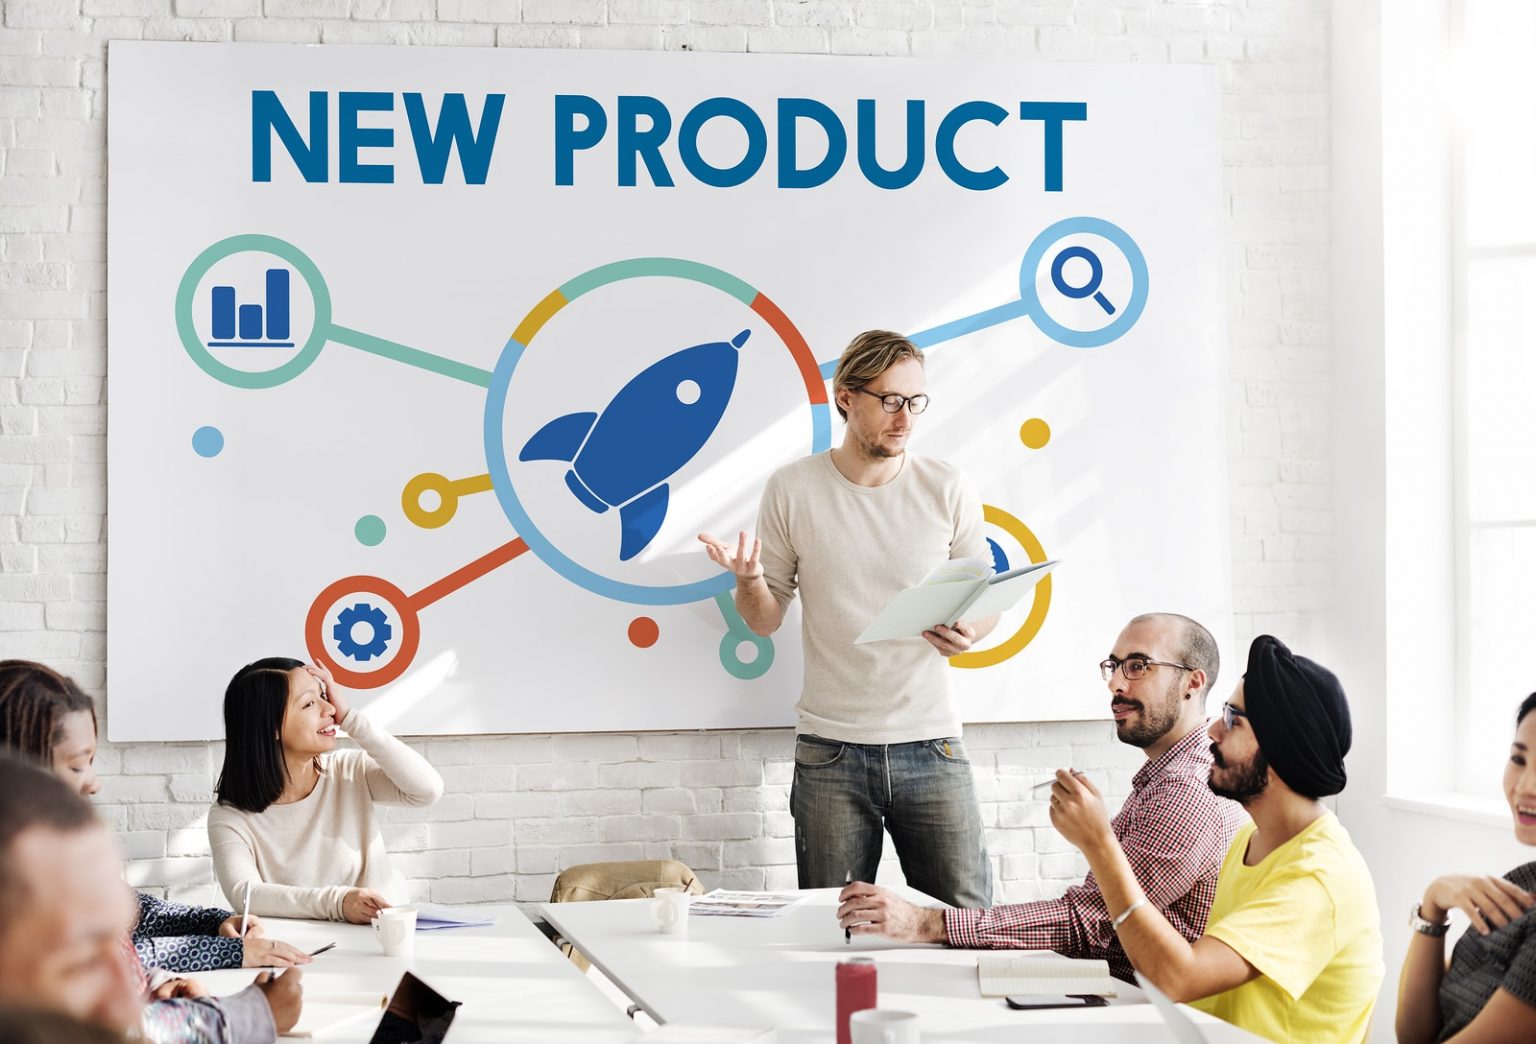 How to Develop a Product Launch Marketing Plan